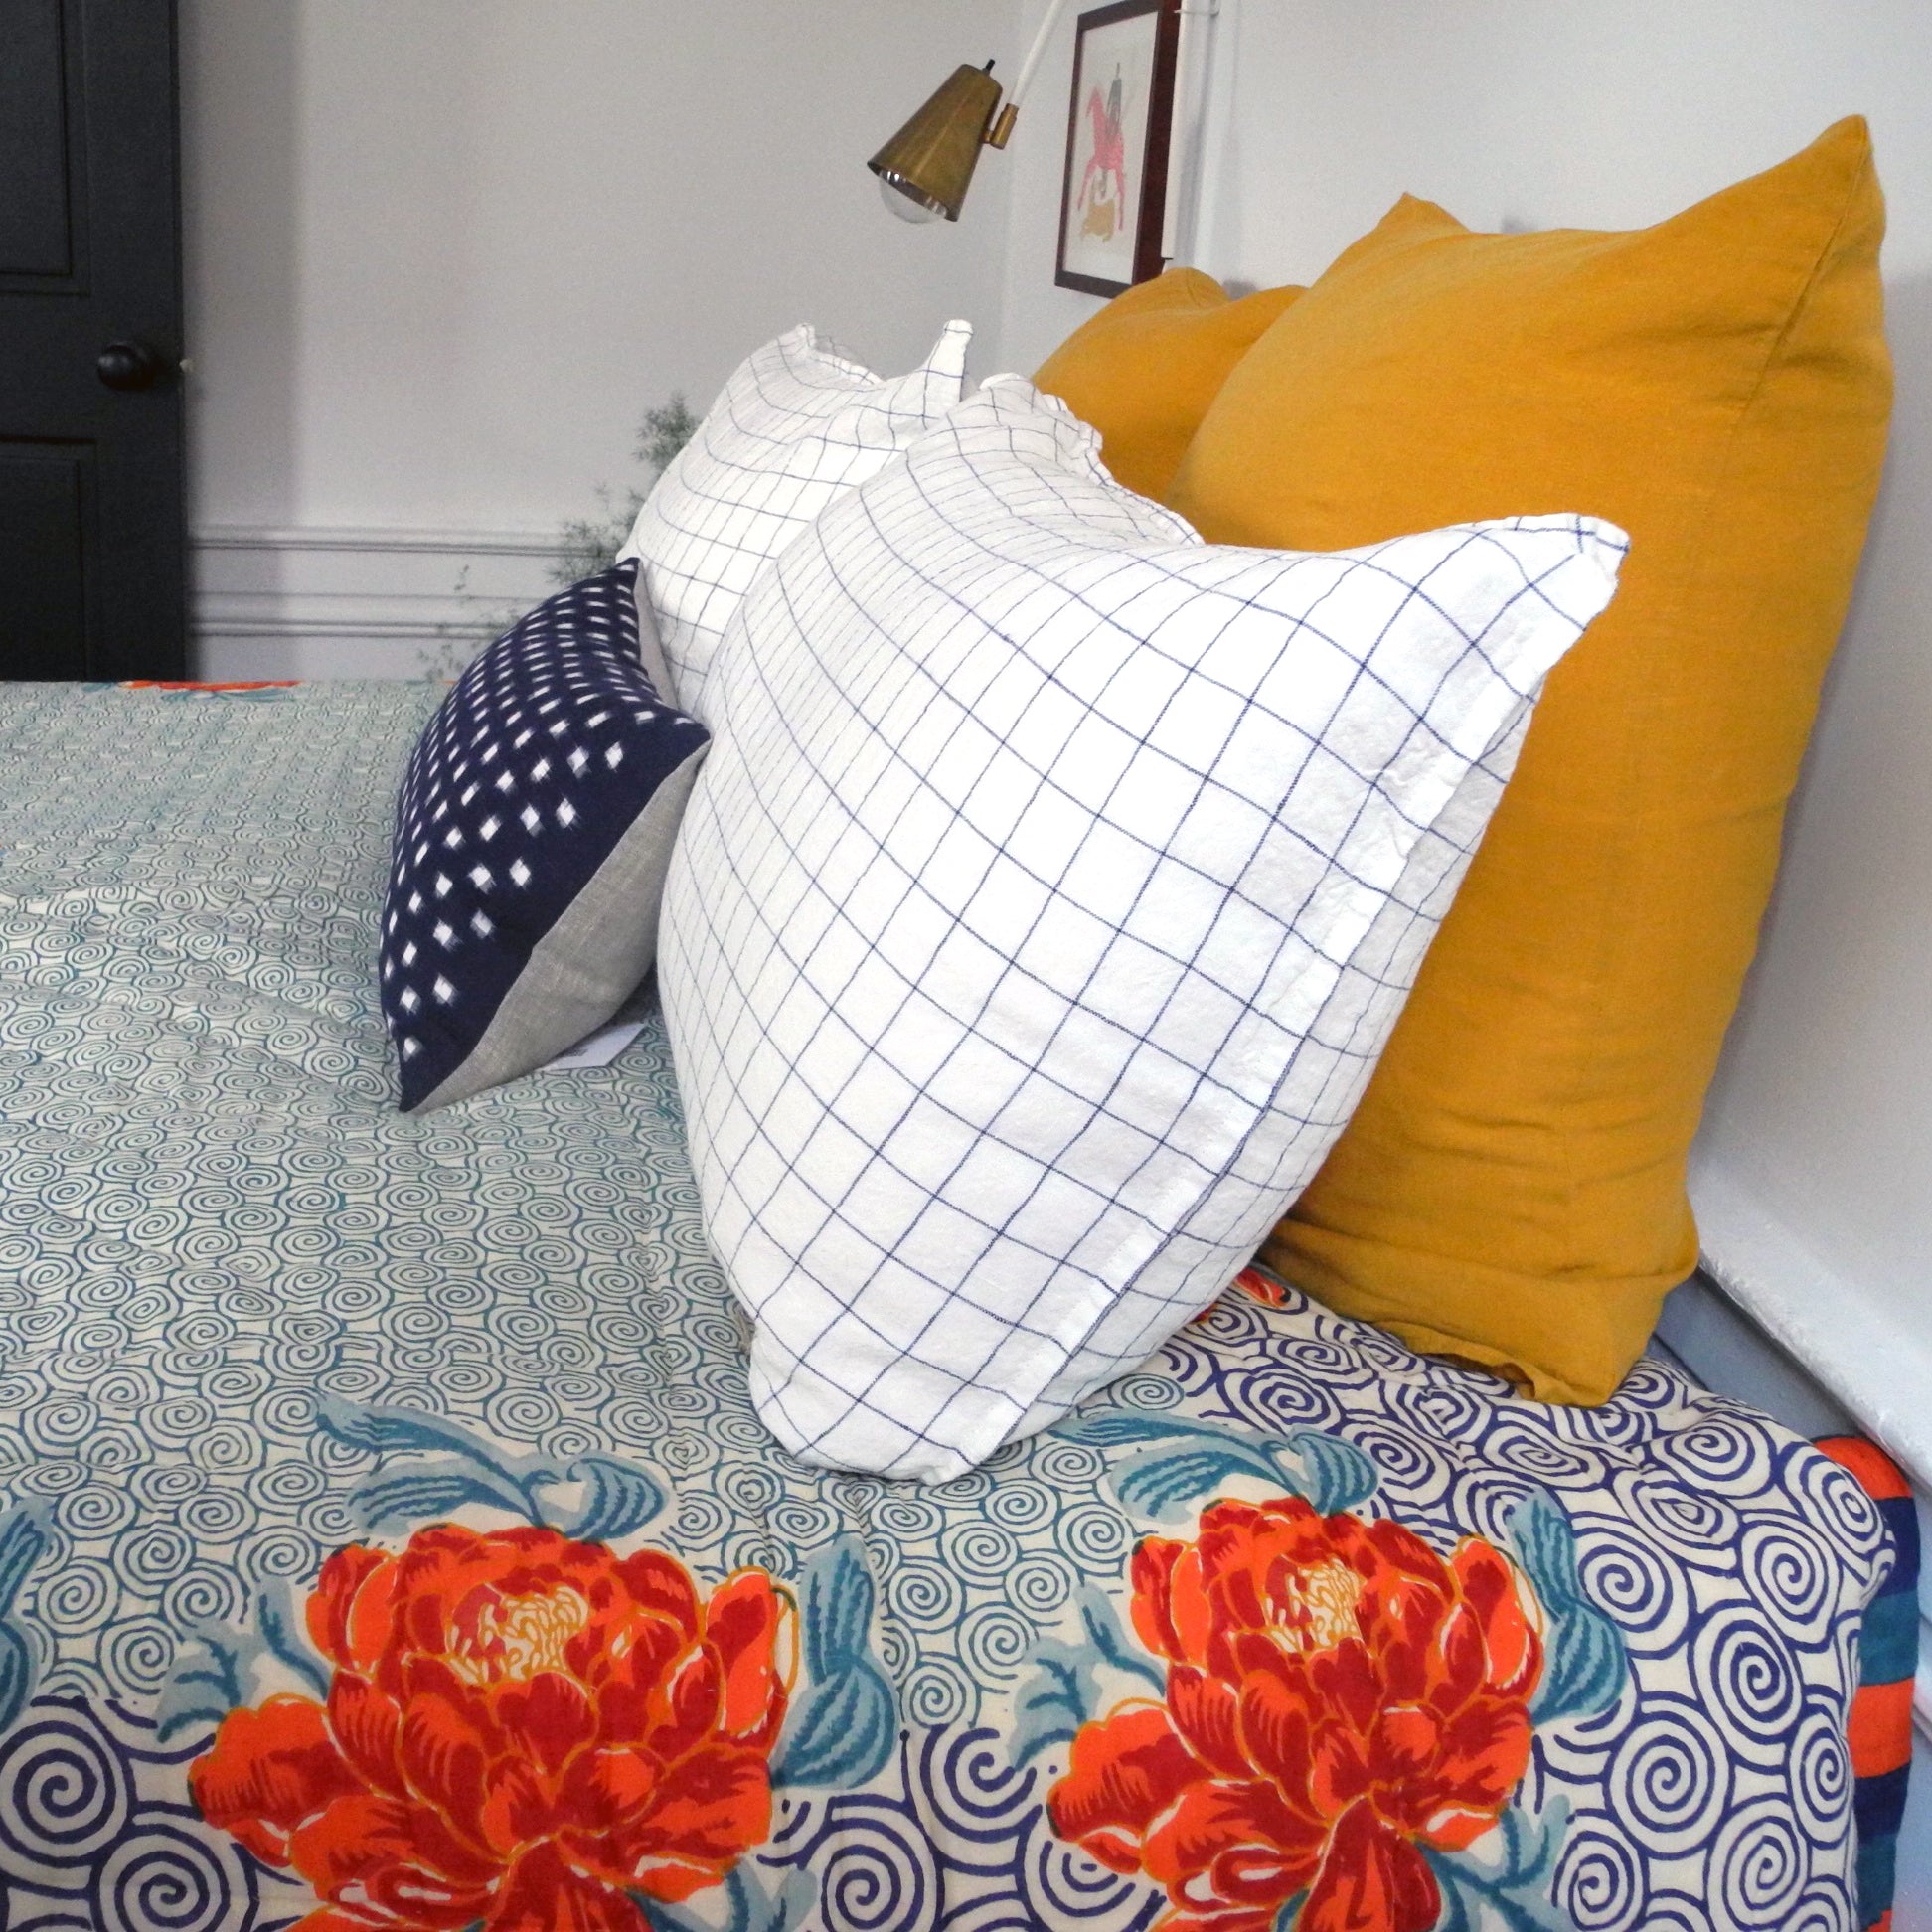 Linge Particulier Honey Yellow Euro Linen Pillowcase Sham with a Lisa Corti quilt and navy check pillowcases for a colorful linen bedding look in mustard yellow - Collyer's Mansion